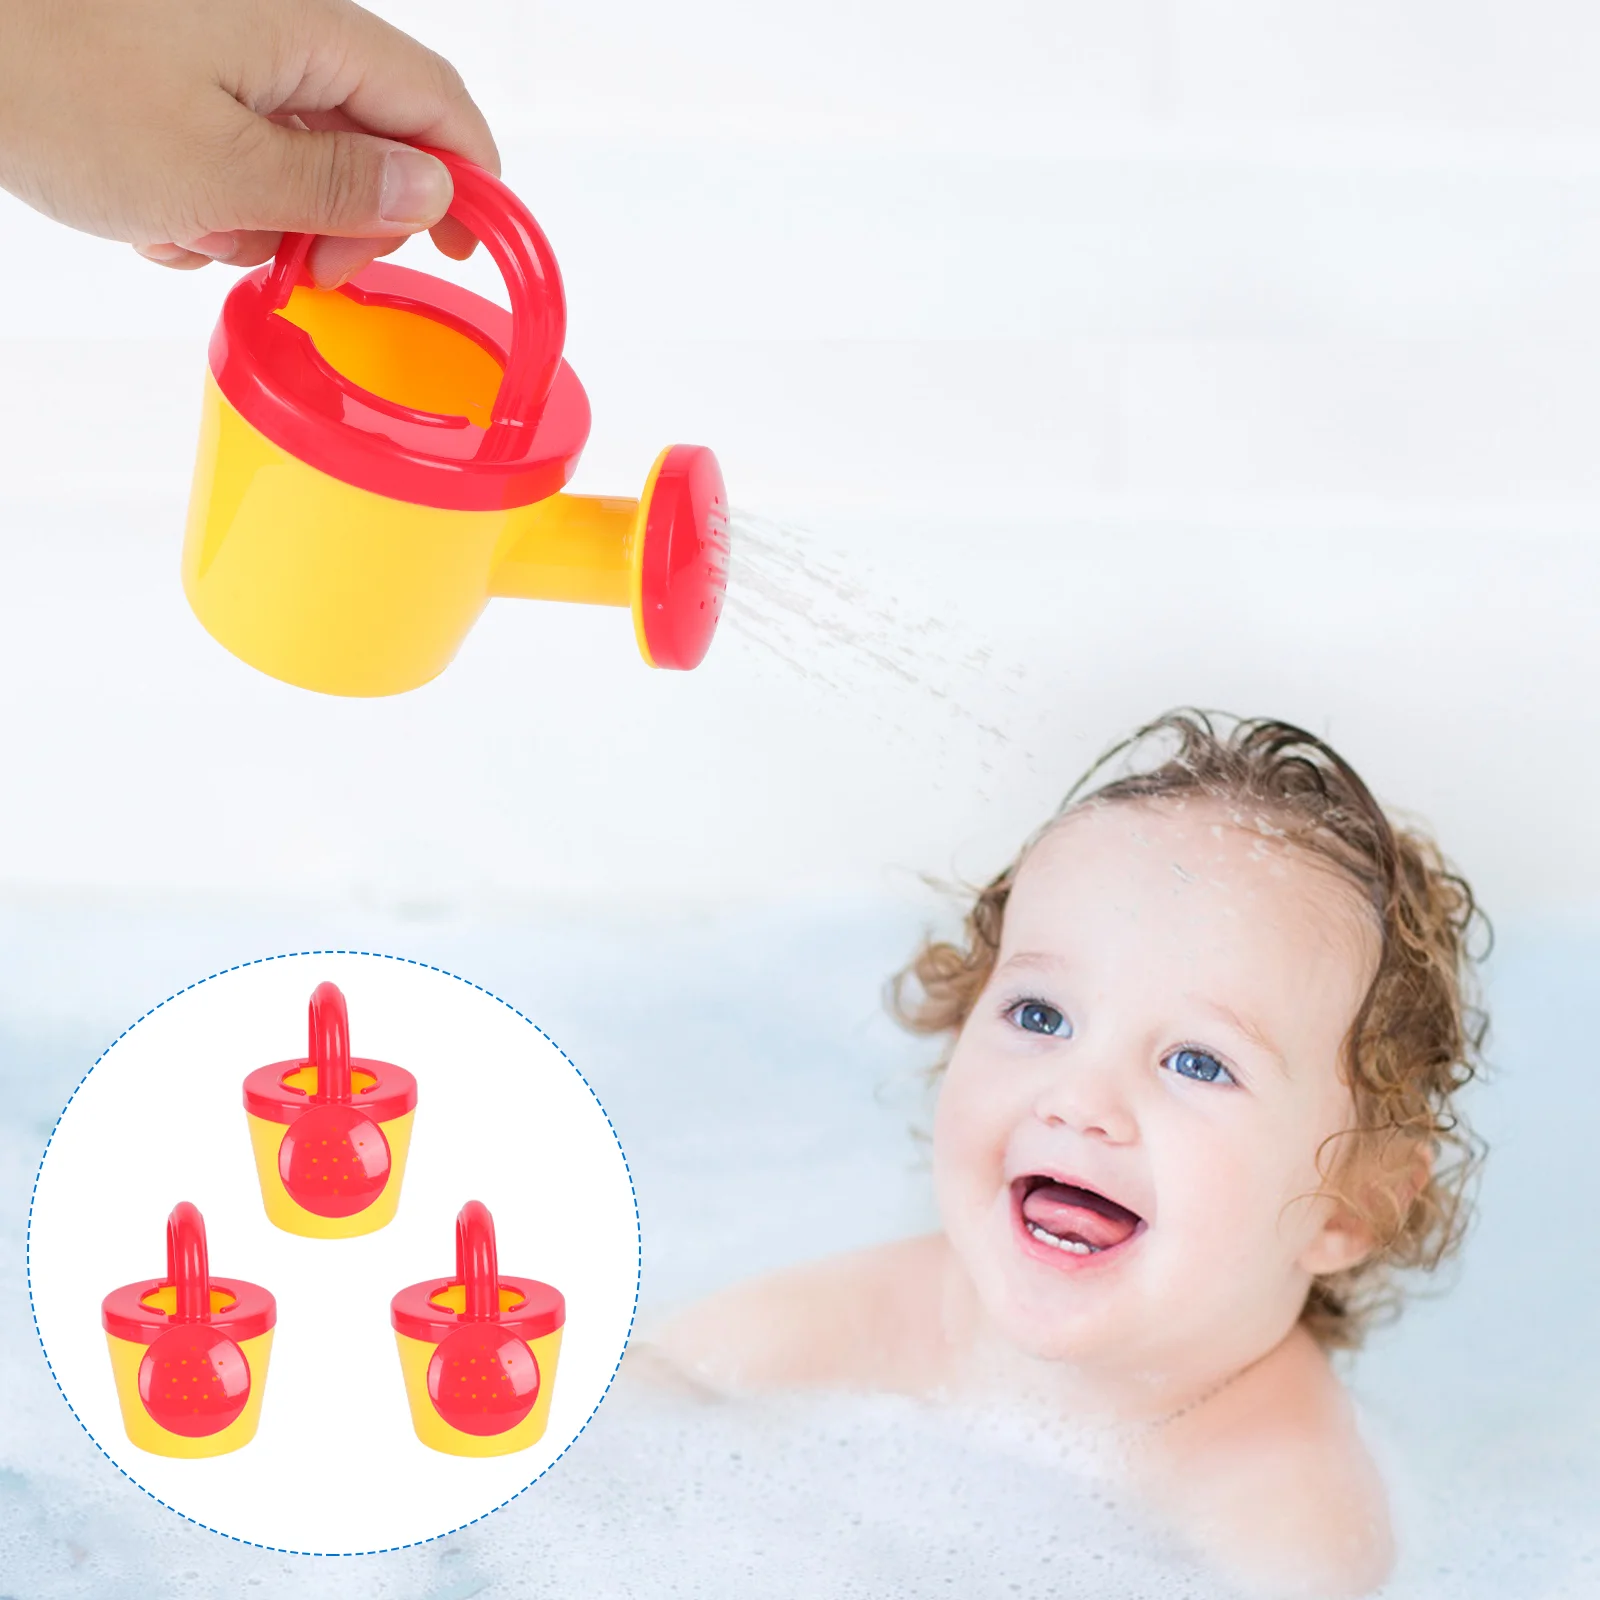 

3 Pcs Watering Pail Baby Bath Toys Plastic Can Kids Gardening Play Toddler Sand